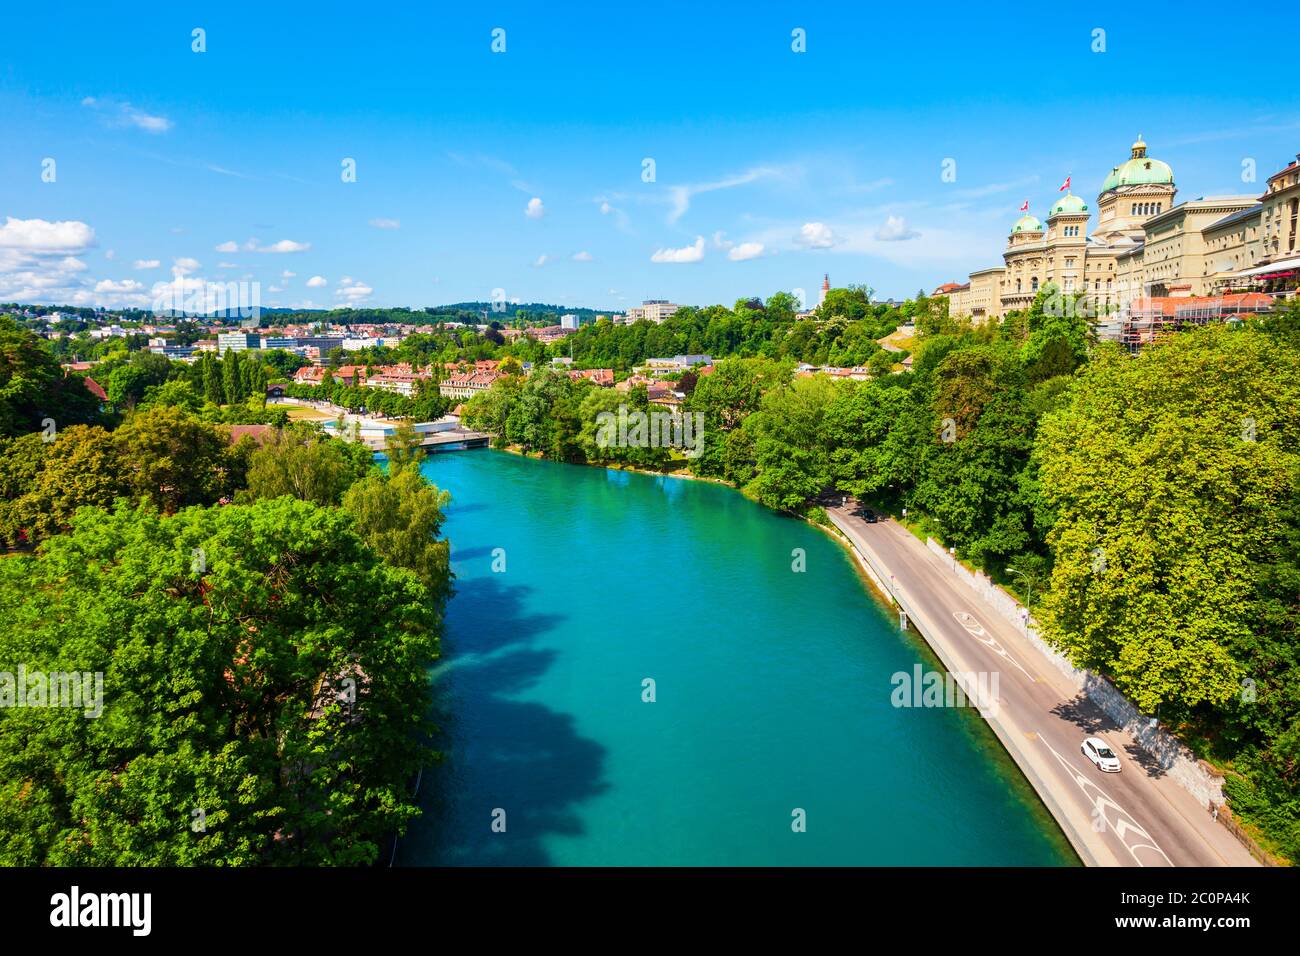 The Federal Palace or Bundeshaus is the building housing the Swiss Federal Assembly and Council in Bern city in Switzerland Stock Photo